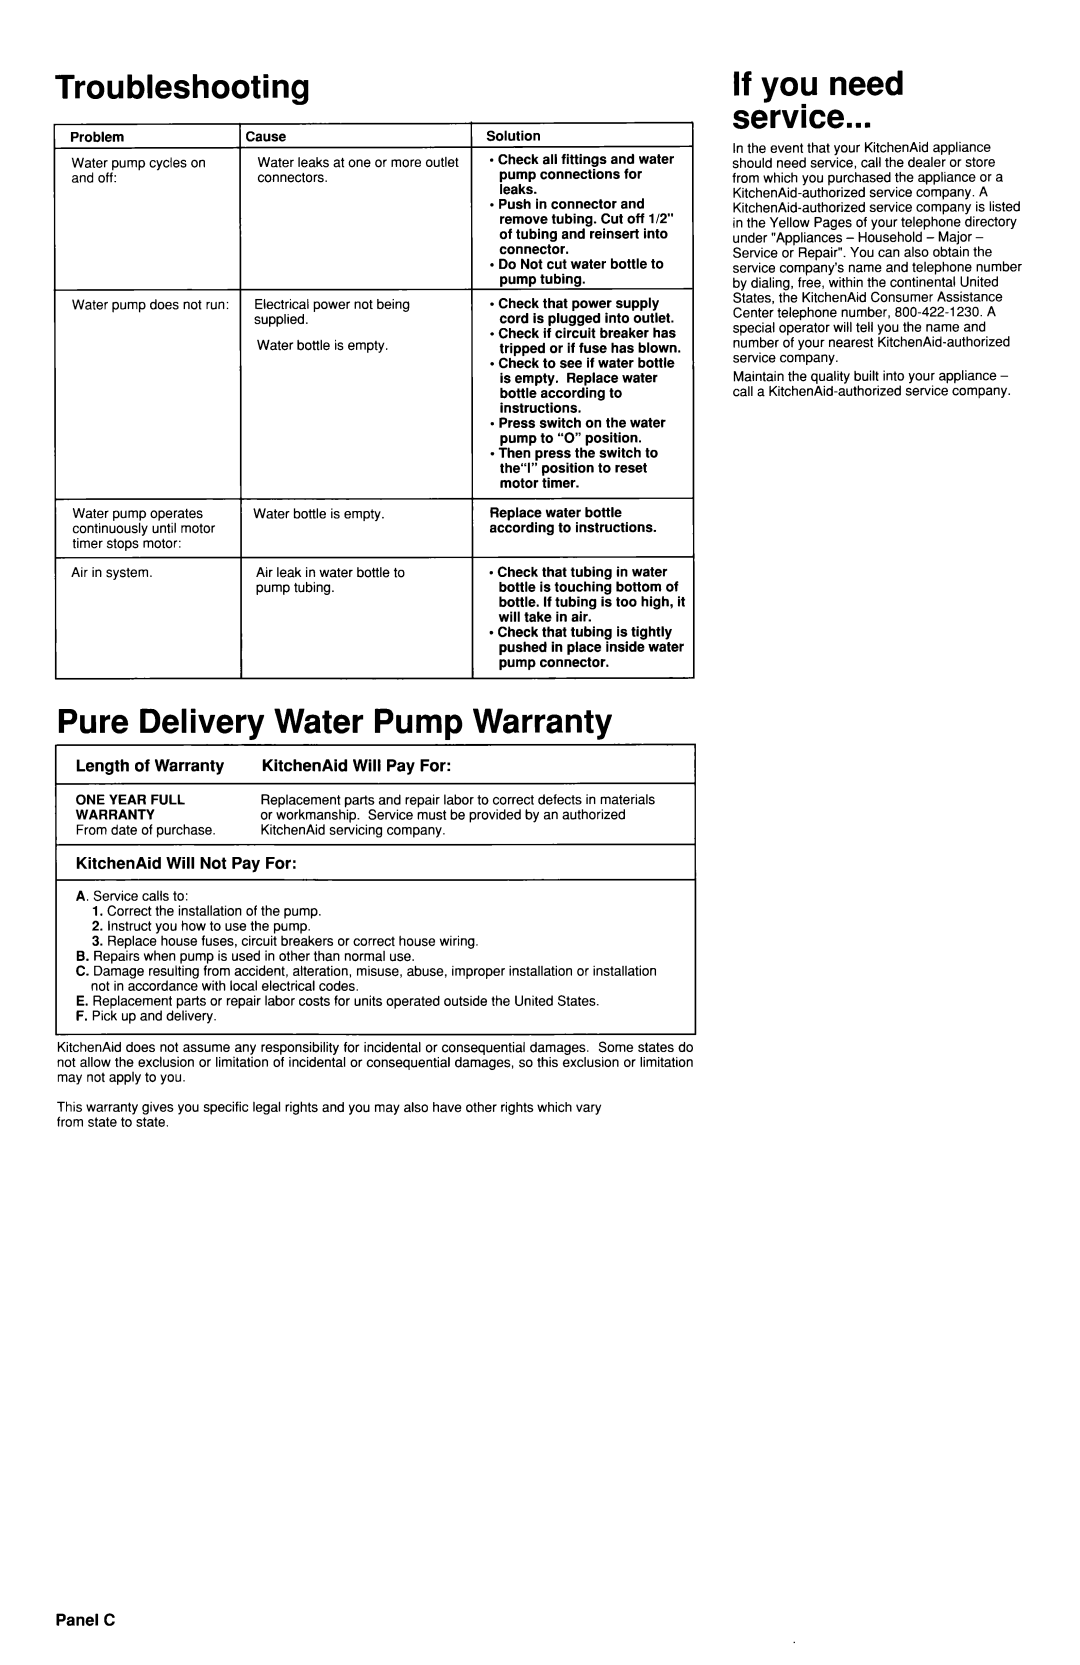 KitchenAid 4176199 Troubleshooting, If you need service, Pure Delivery Water Pump Warranty, Length of Warranty, KitchenAid 